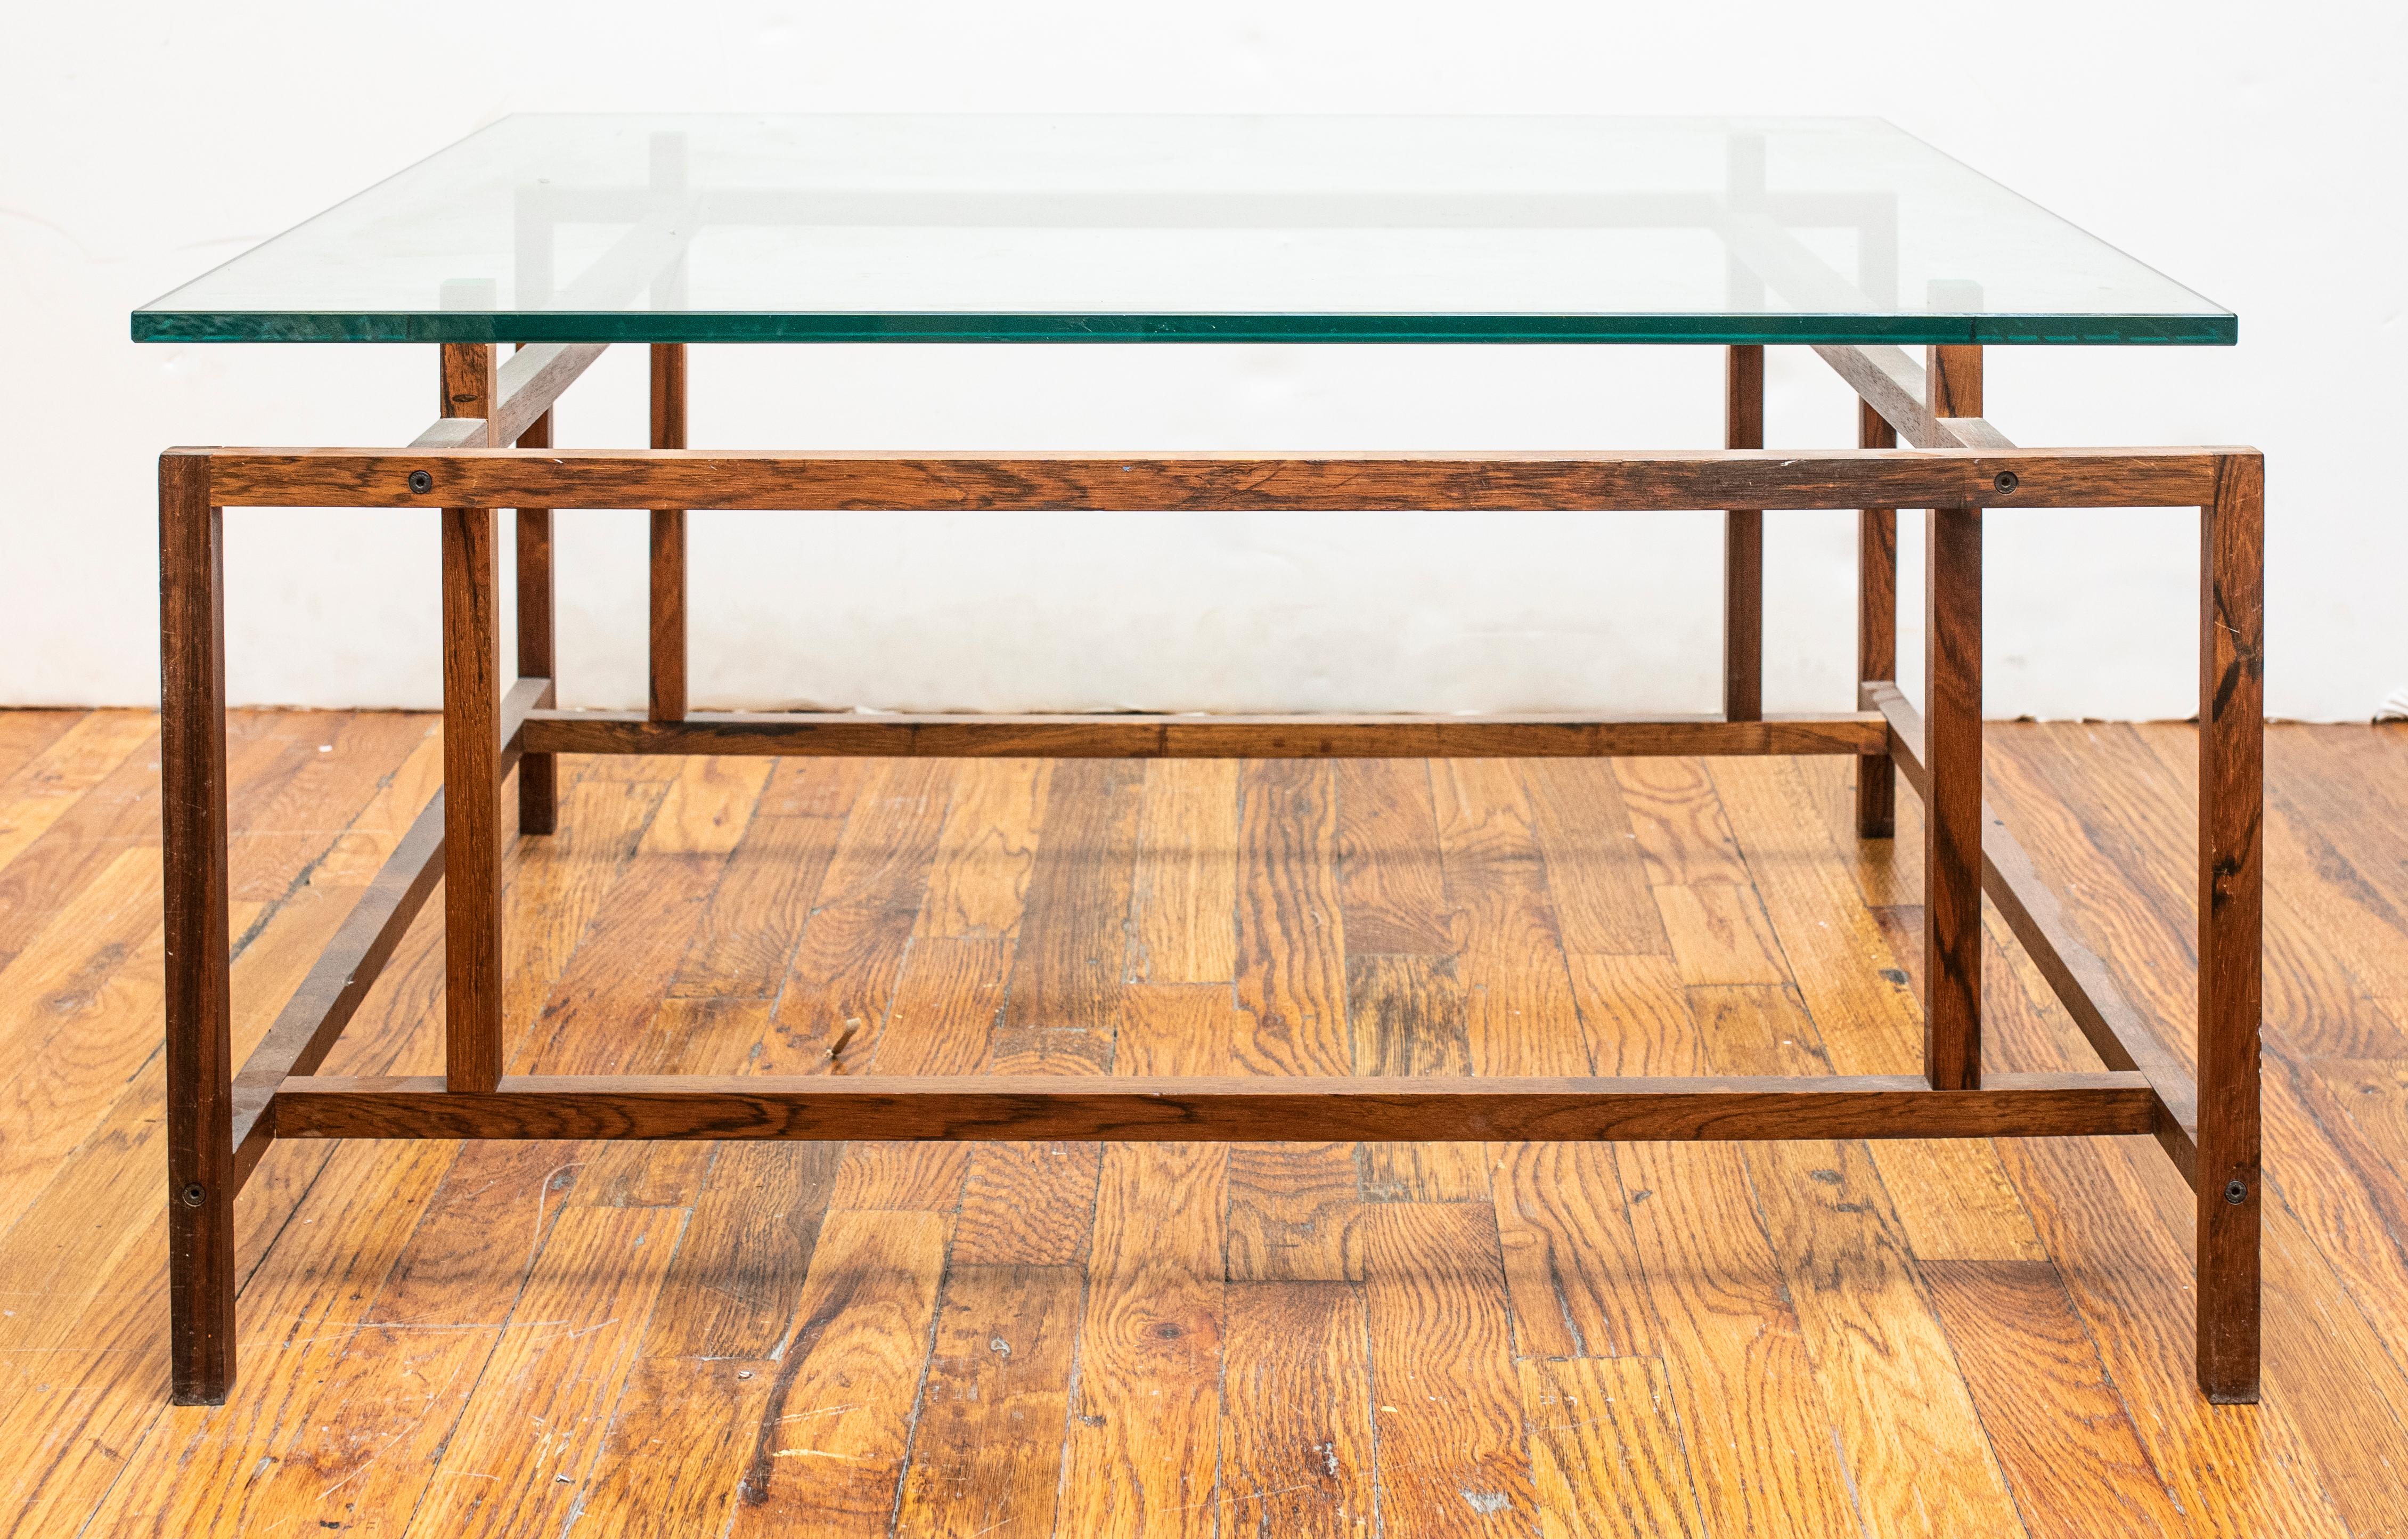 Henning Norgaard for Komfort Mobler Danish Mid-Century Modern coffee table with constructivist style teak wood base and square glass top. 16.5